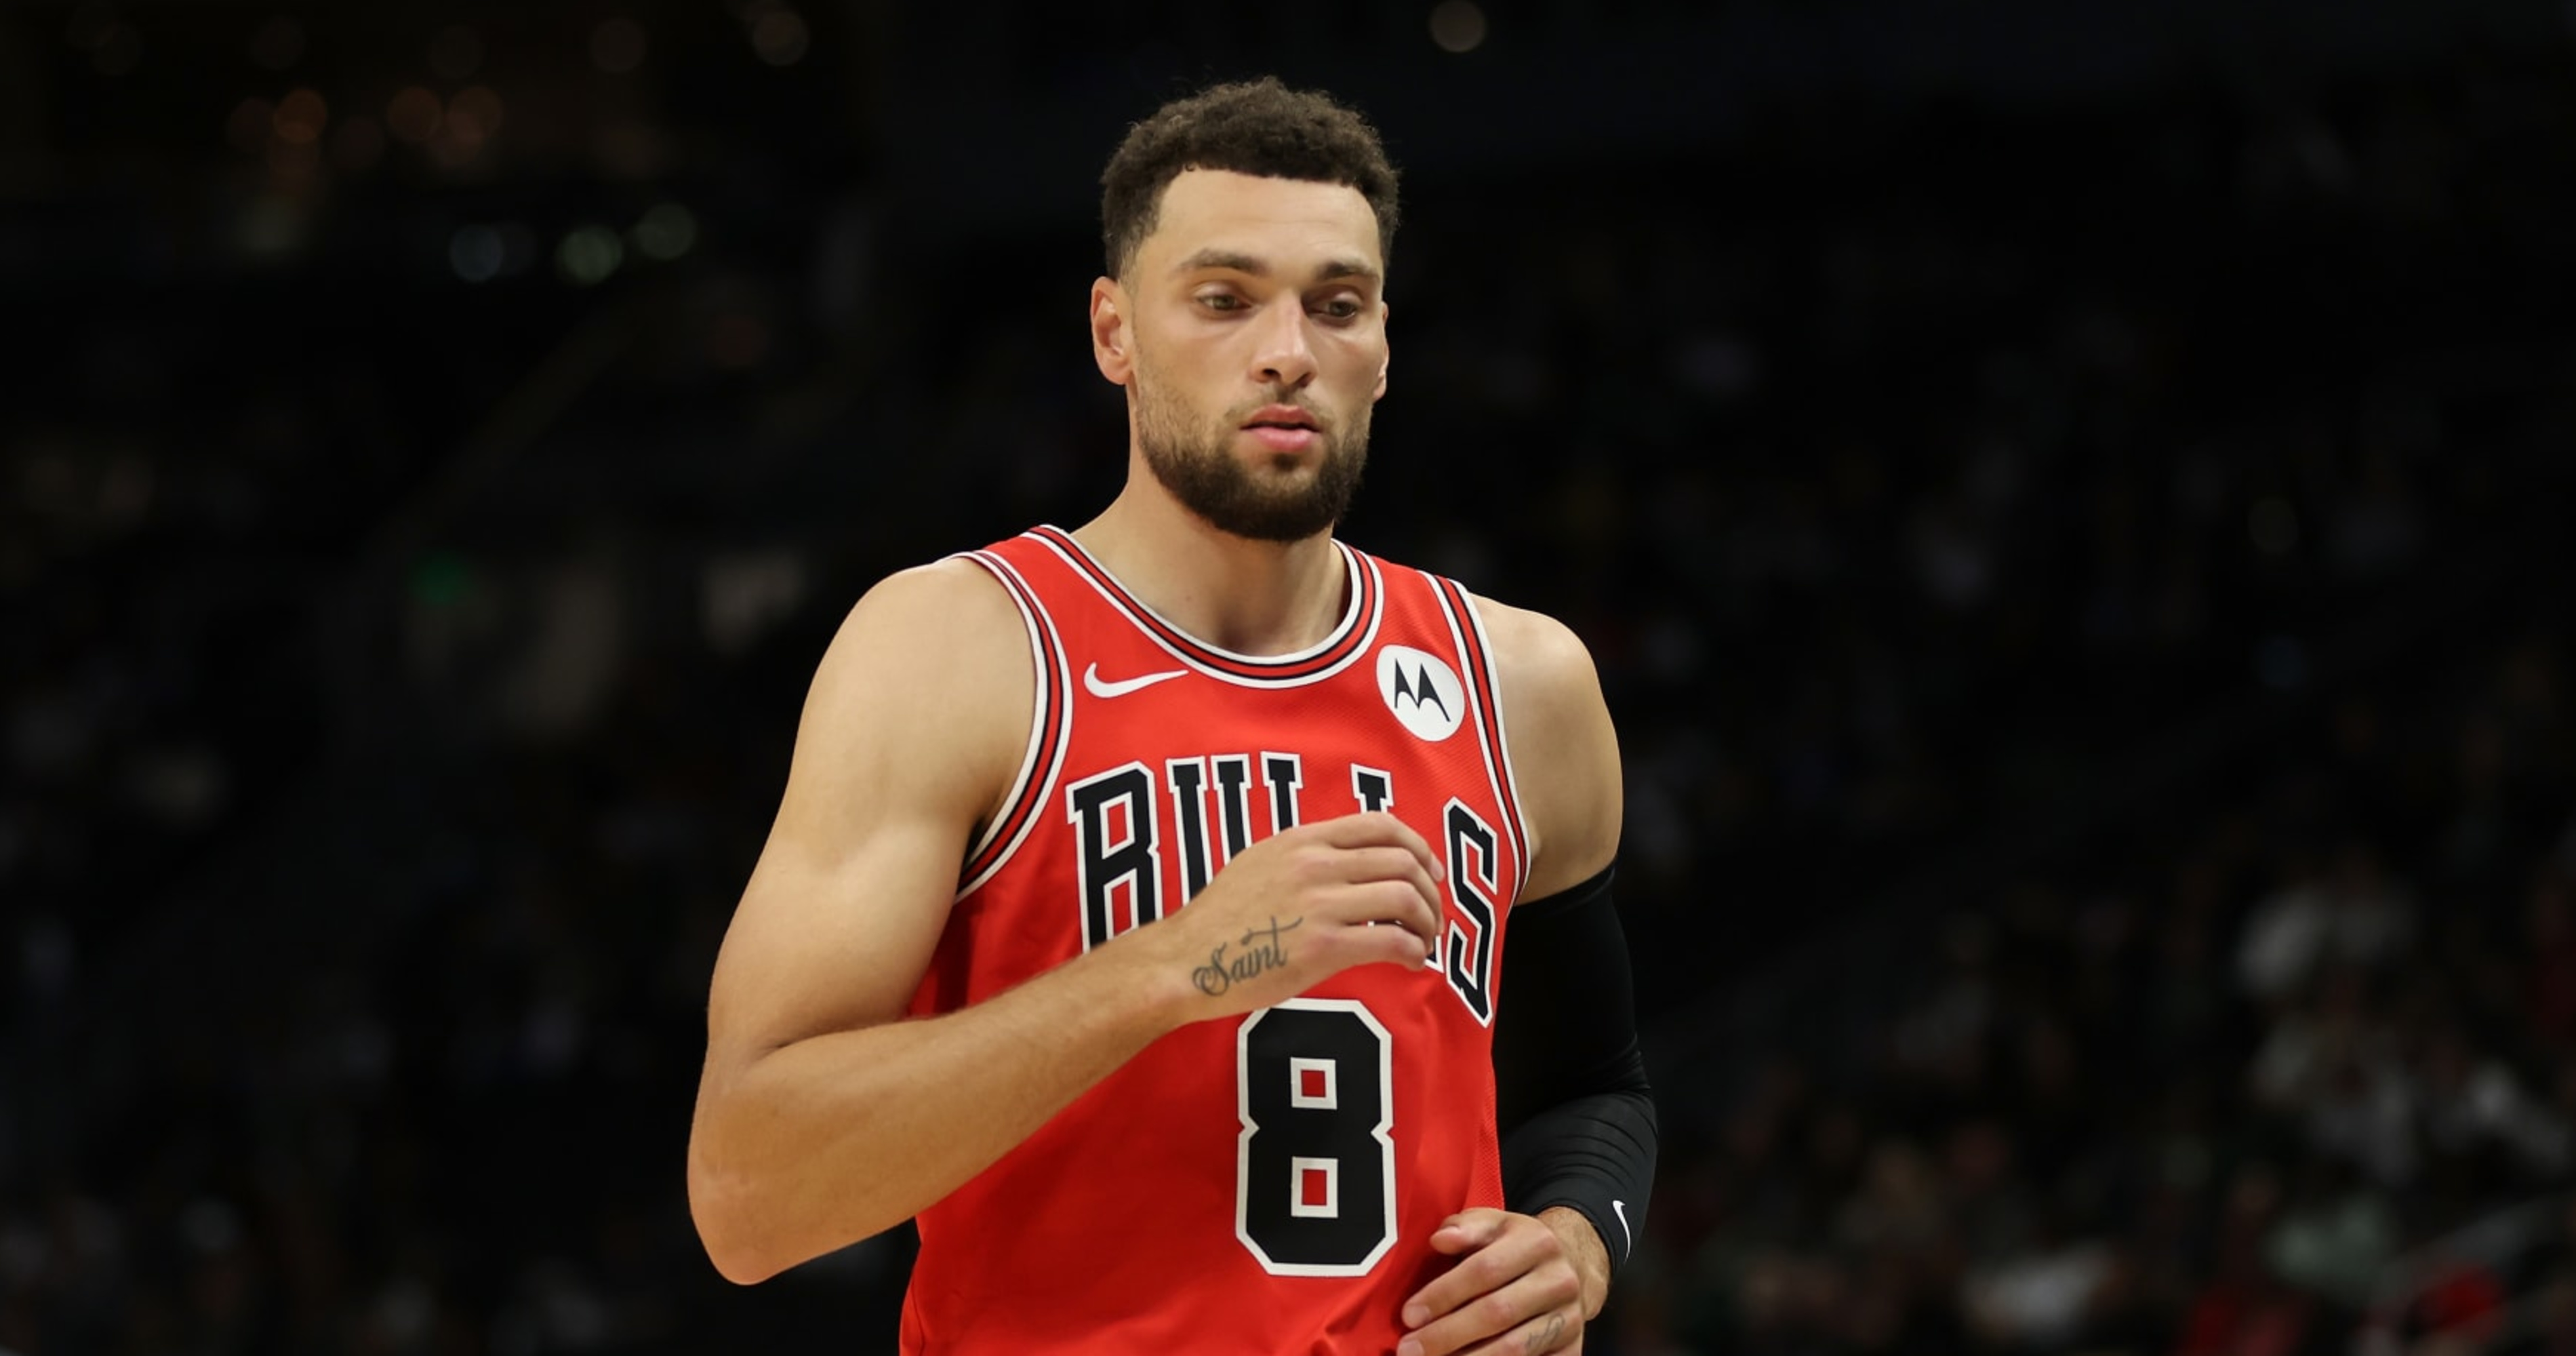 What should the Bulls do in free agency? Zach LaVine and DeMar